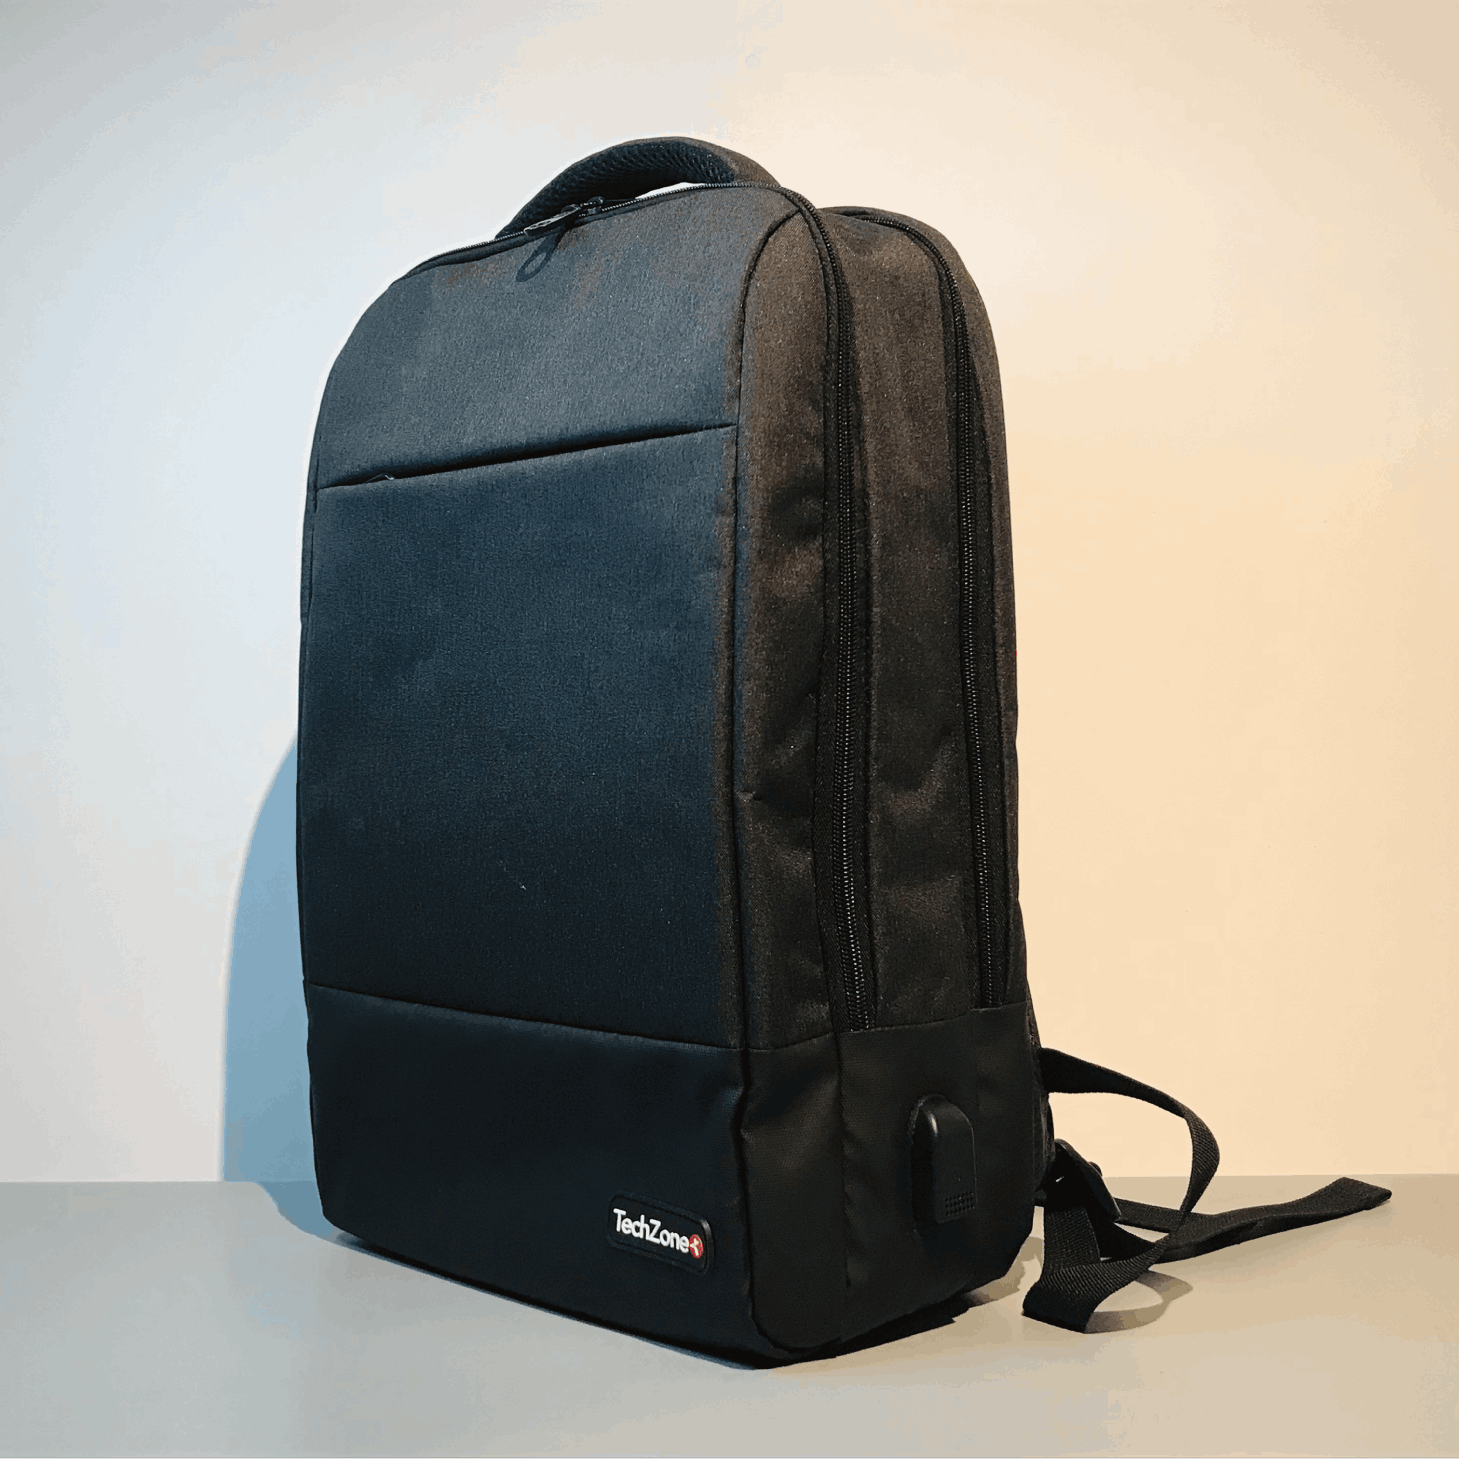 Cute Backpacks for College with Laptop Compartment